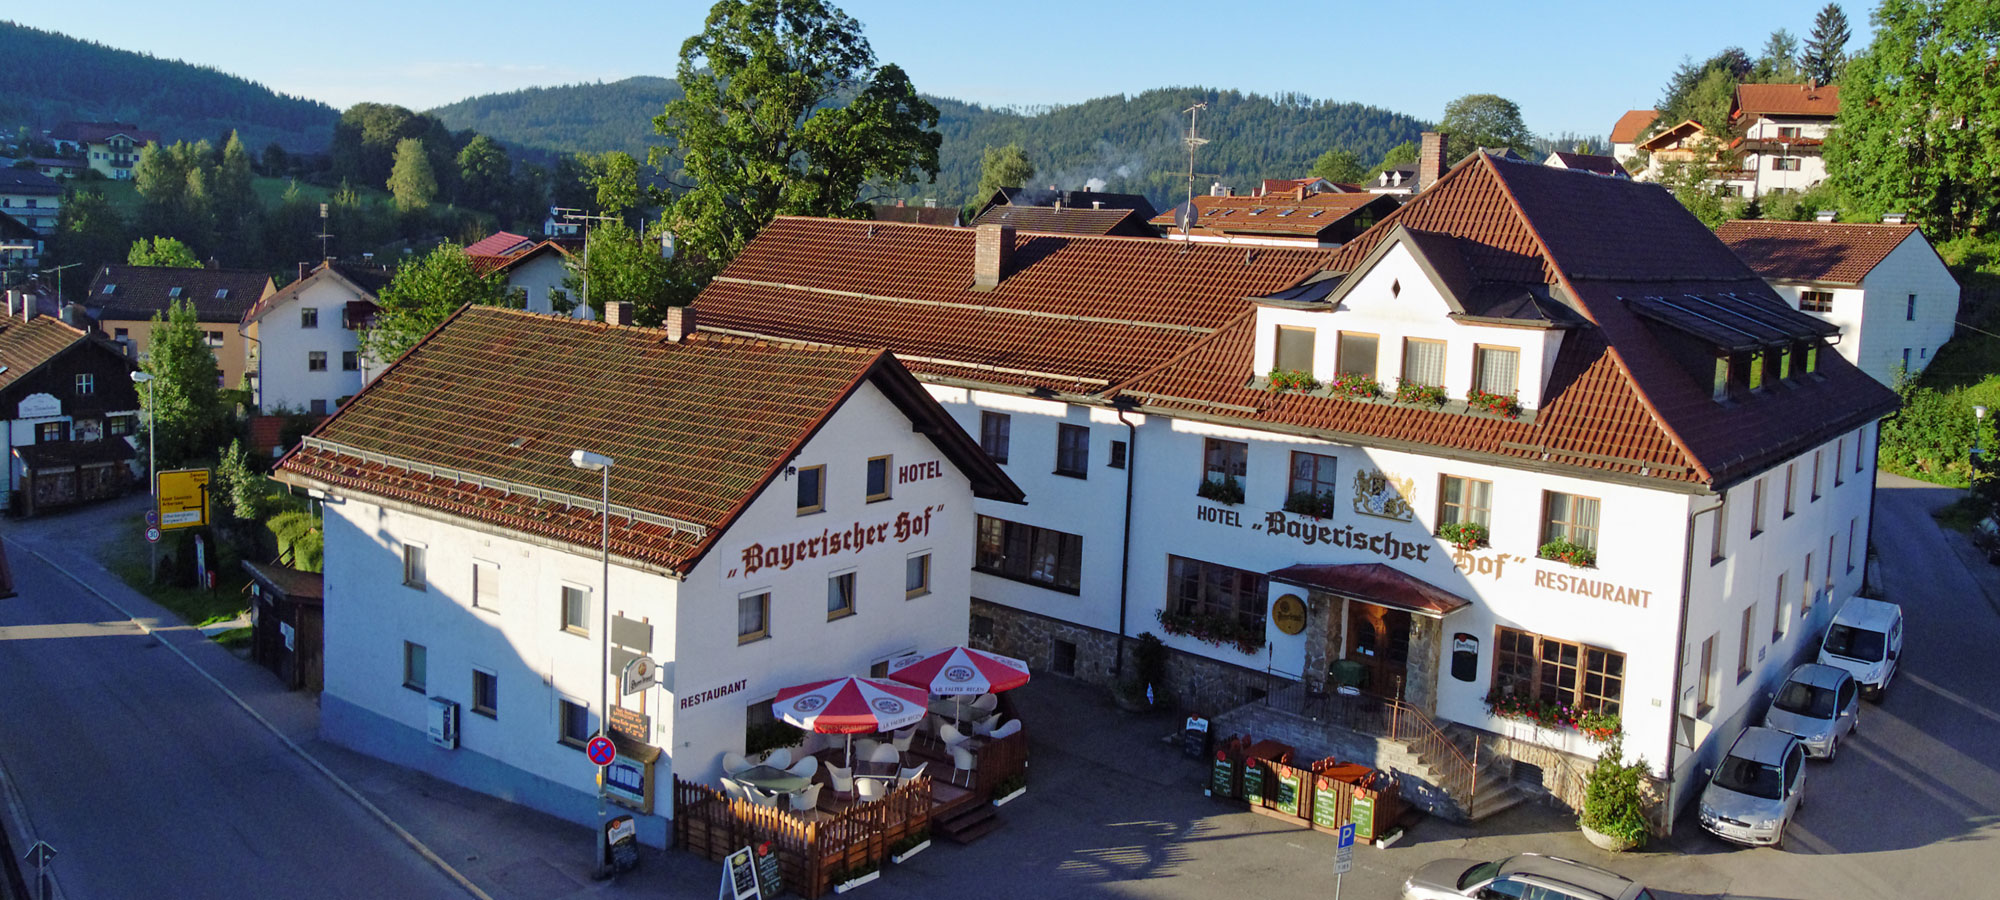 Hotel in Bodenmais am Arber